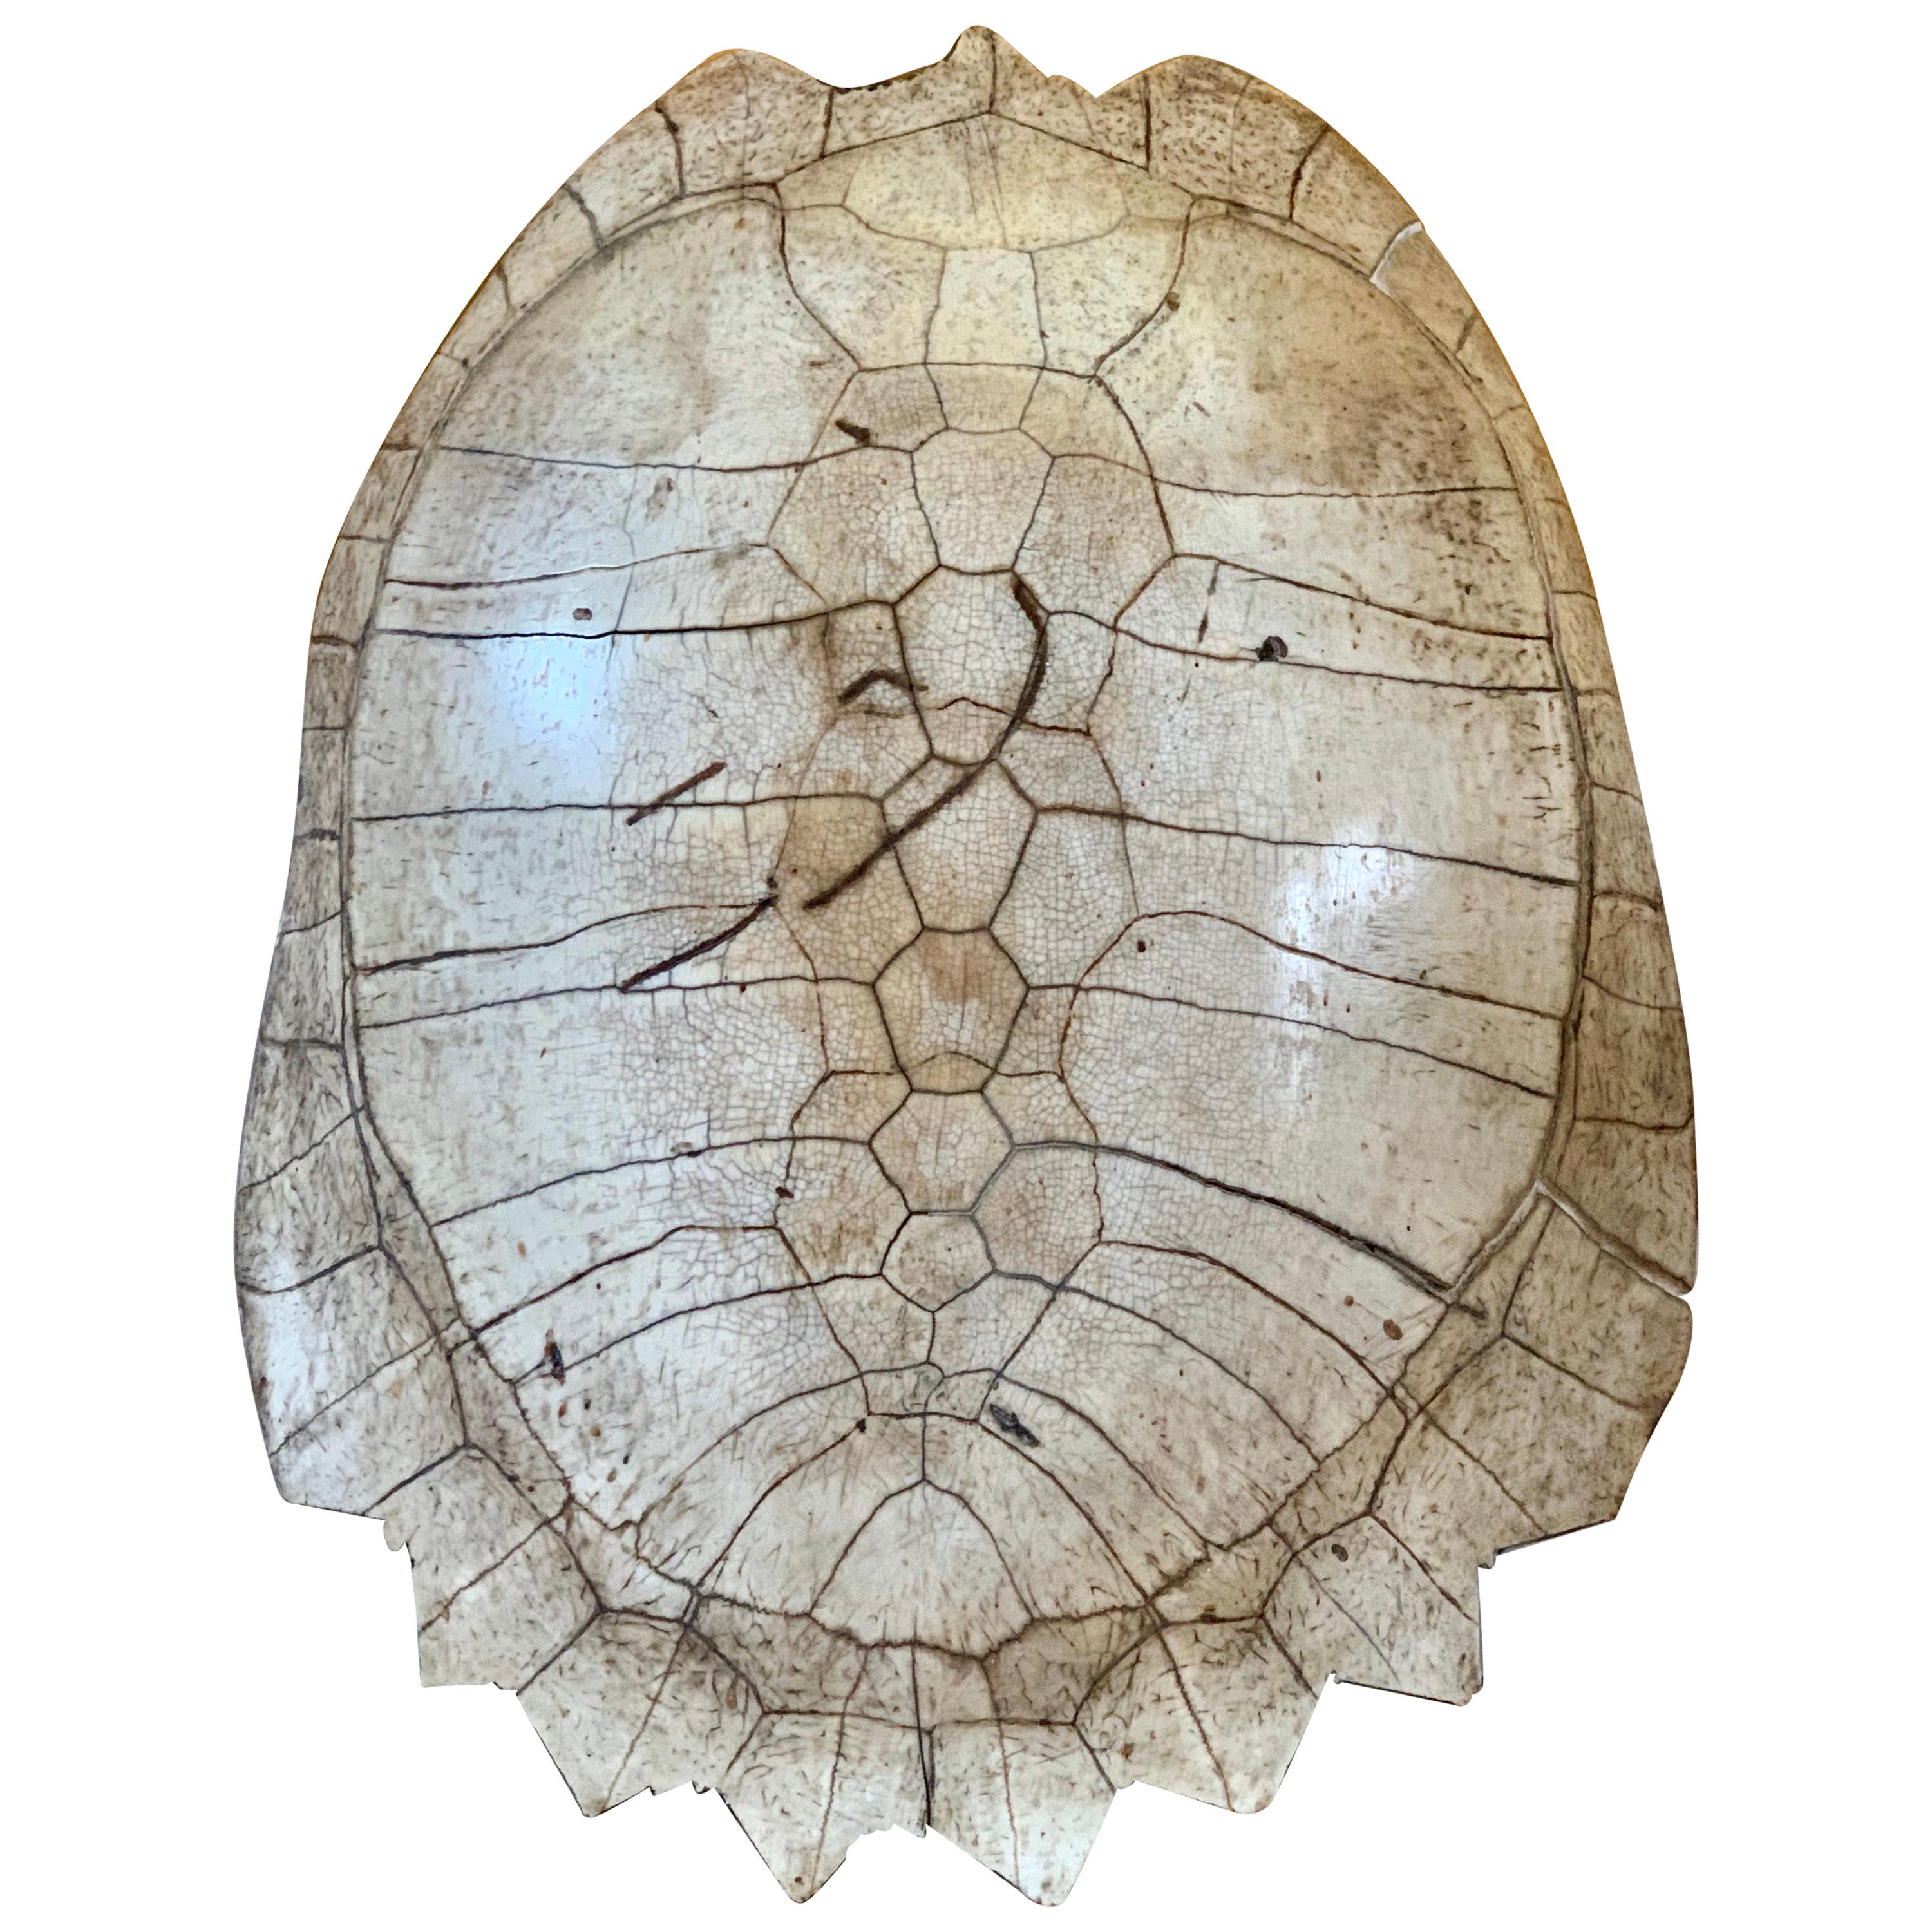 Antique Giant Blonde South American River Turtle Carapace, circa 1880